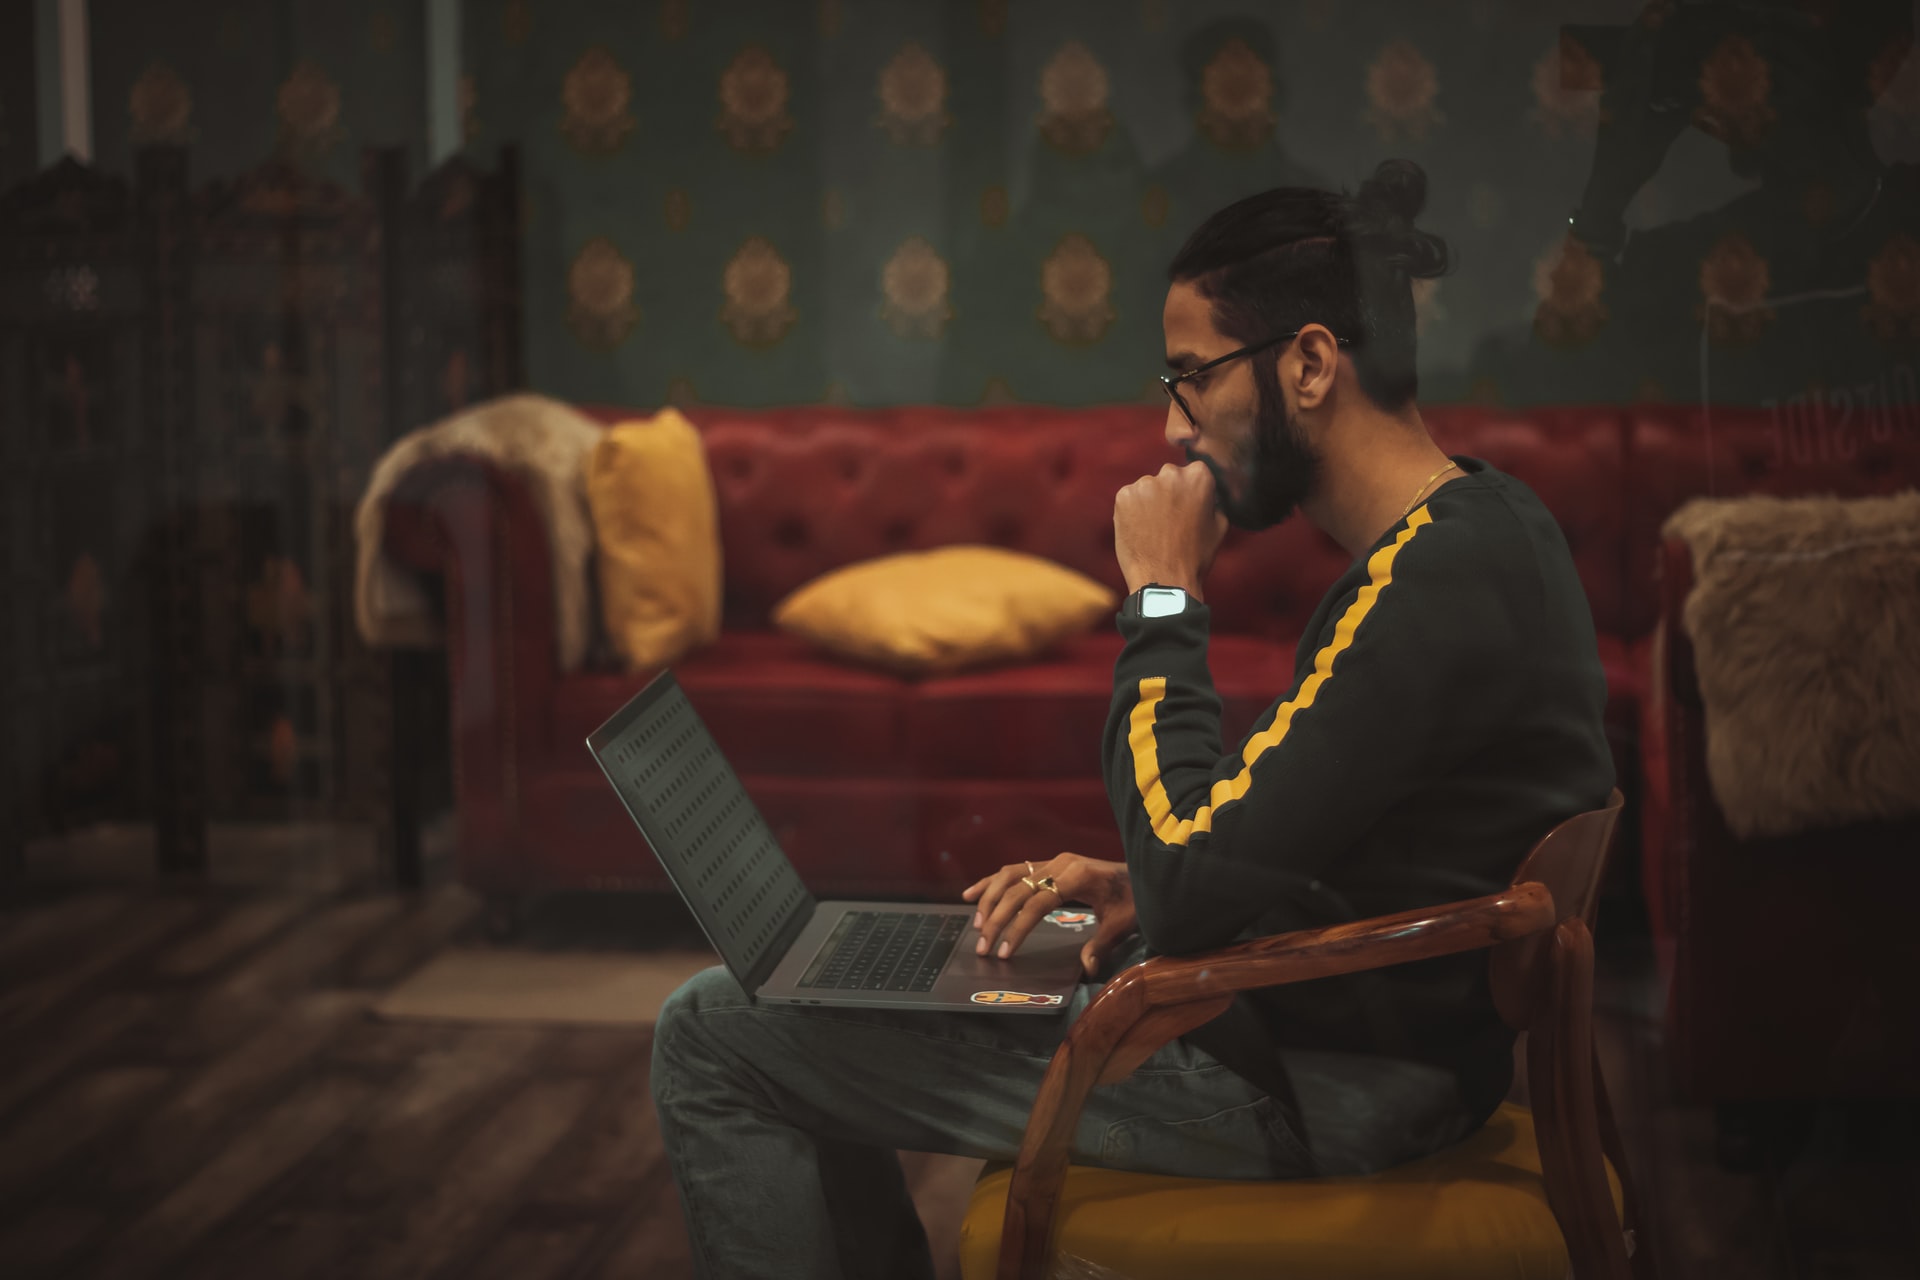 Knowledge Worker with man bun thoughtfully looking at laptop